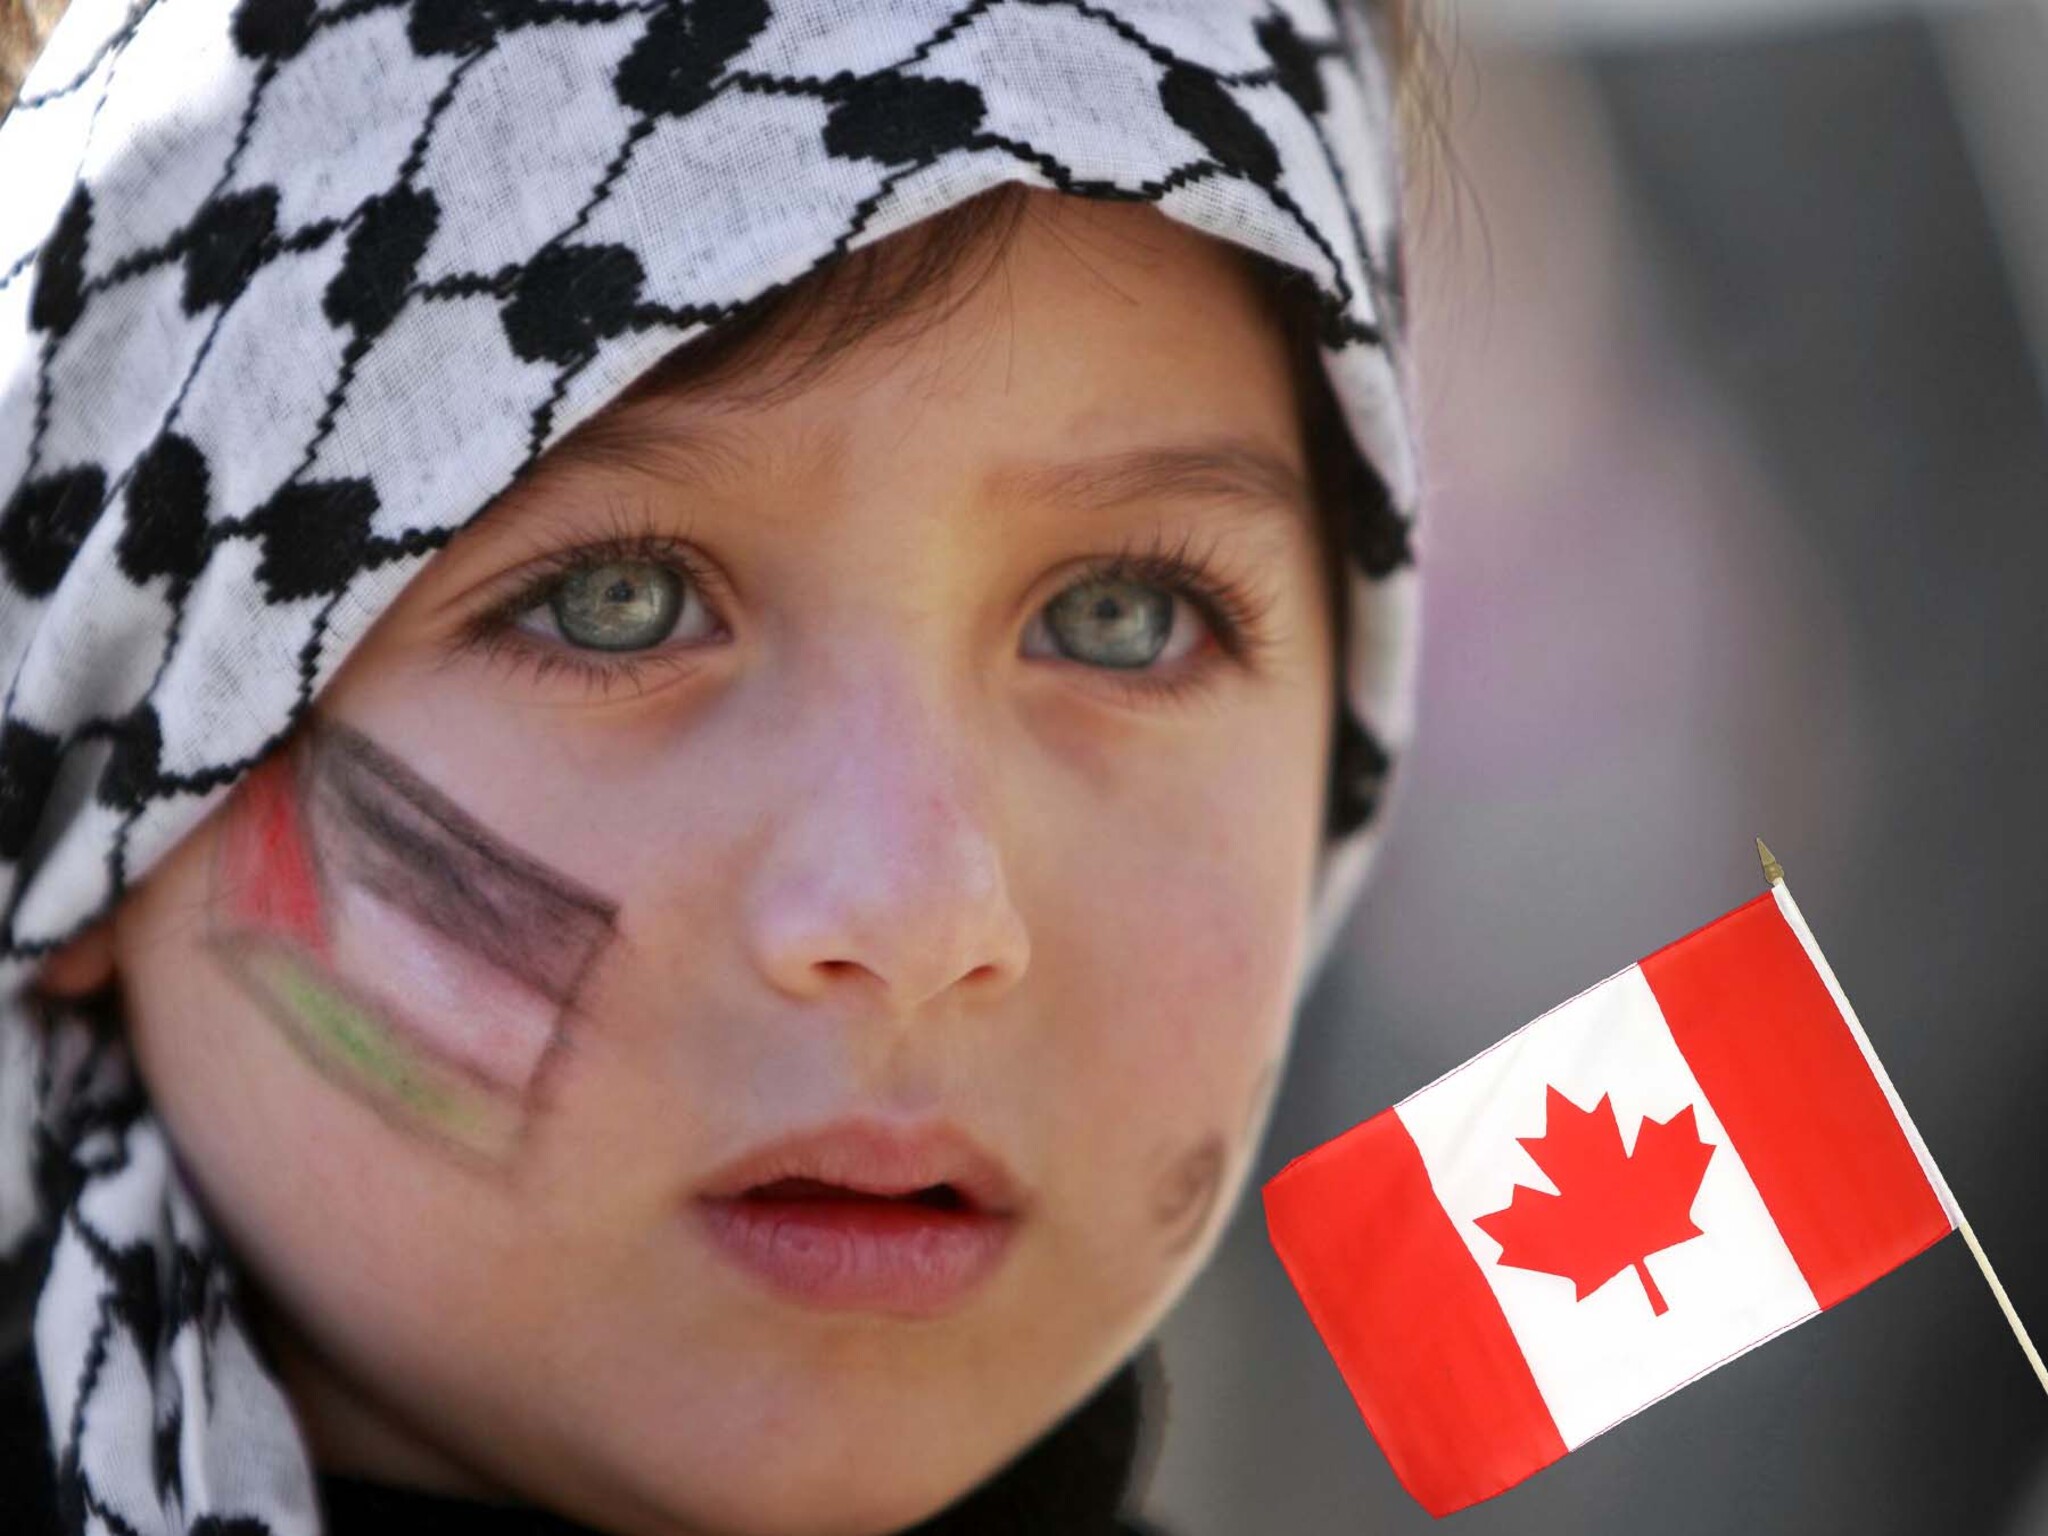 Canada announces the granting of 5,000 new residency visas to Palestinians